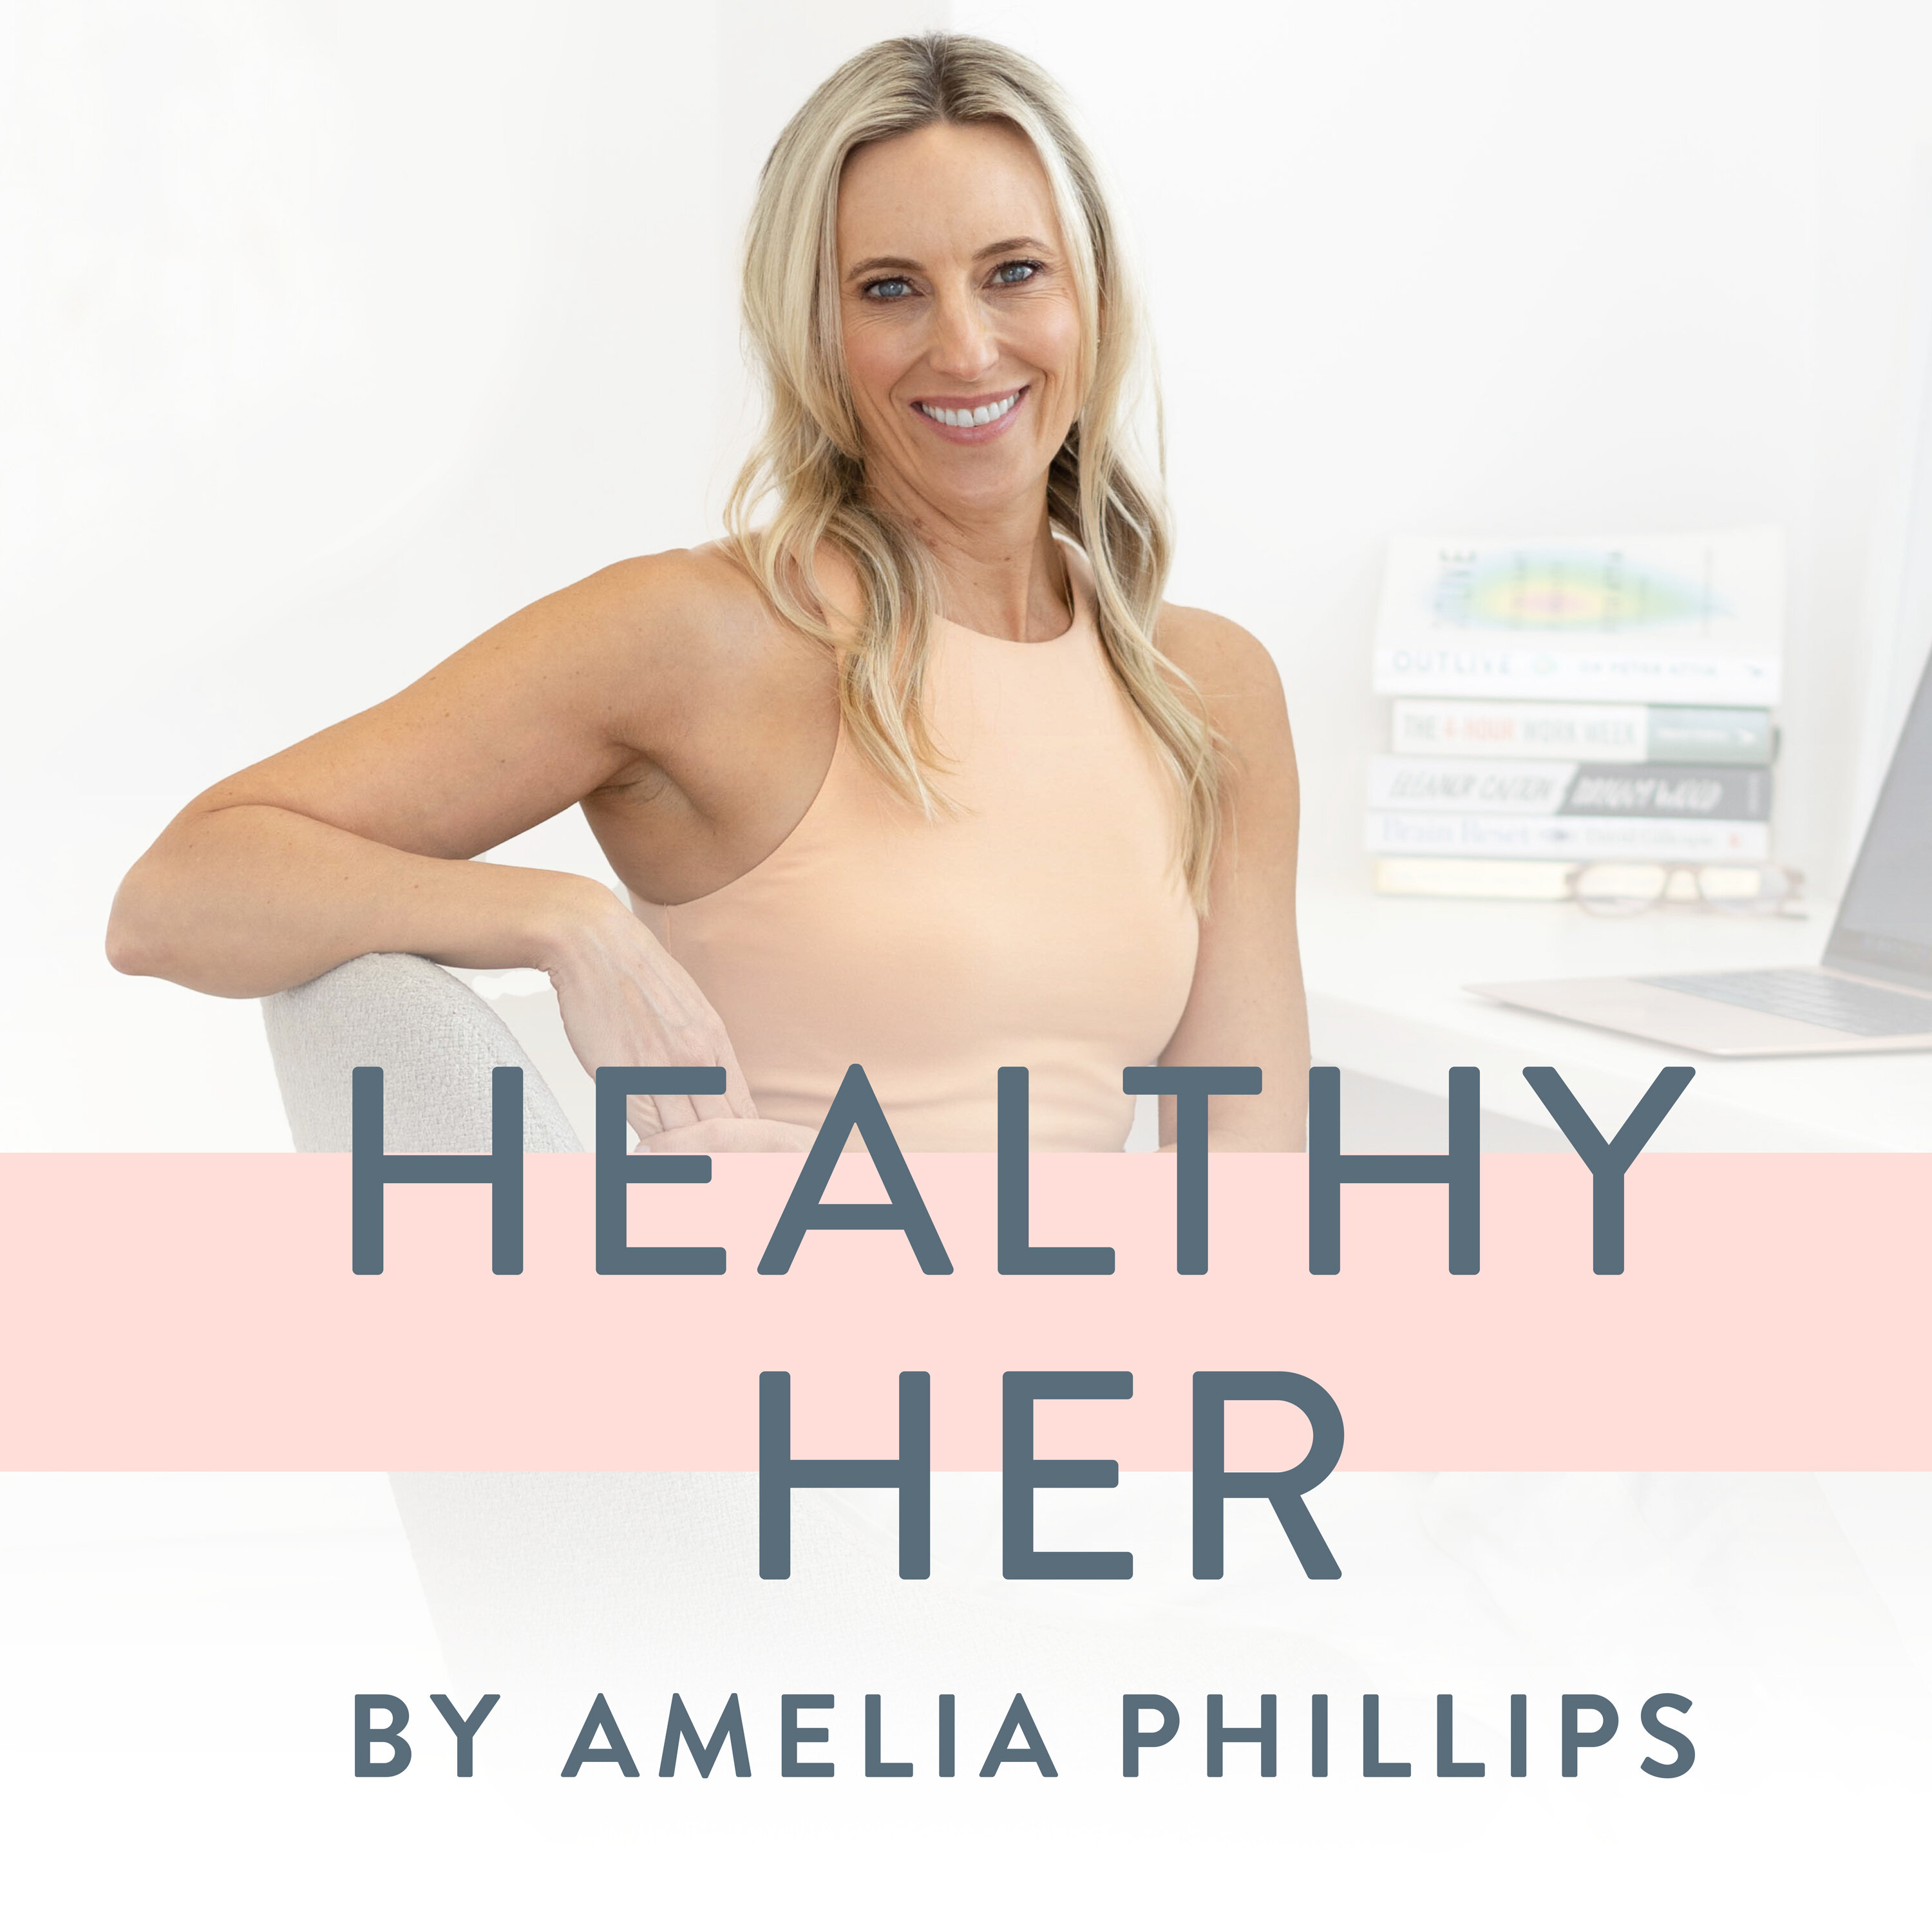 Ask Me Anything: Meal planning, meal delivery services, handling stress, staying motivated